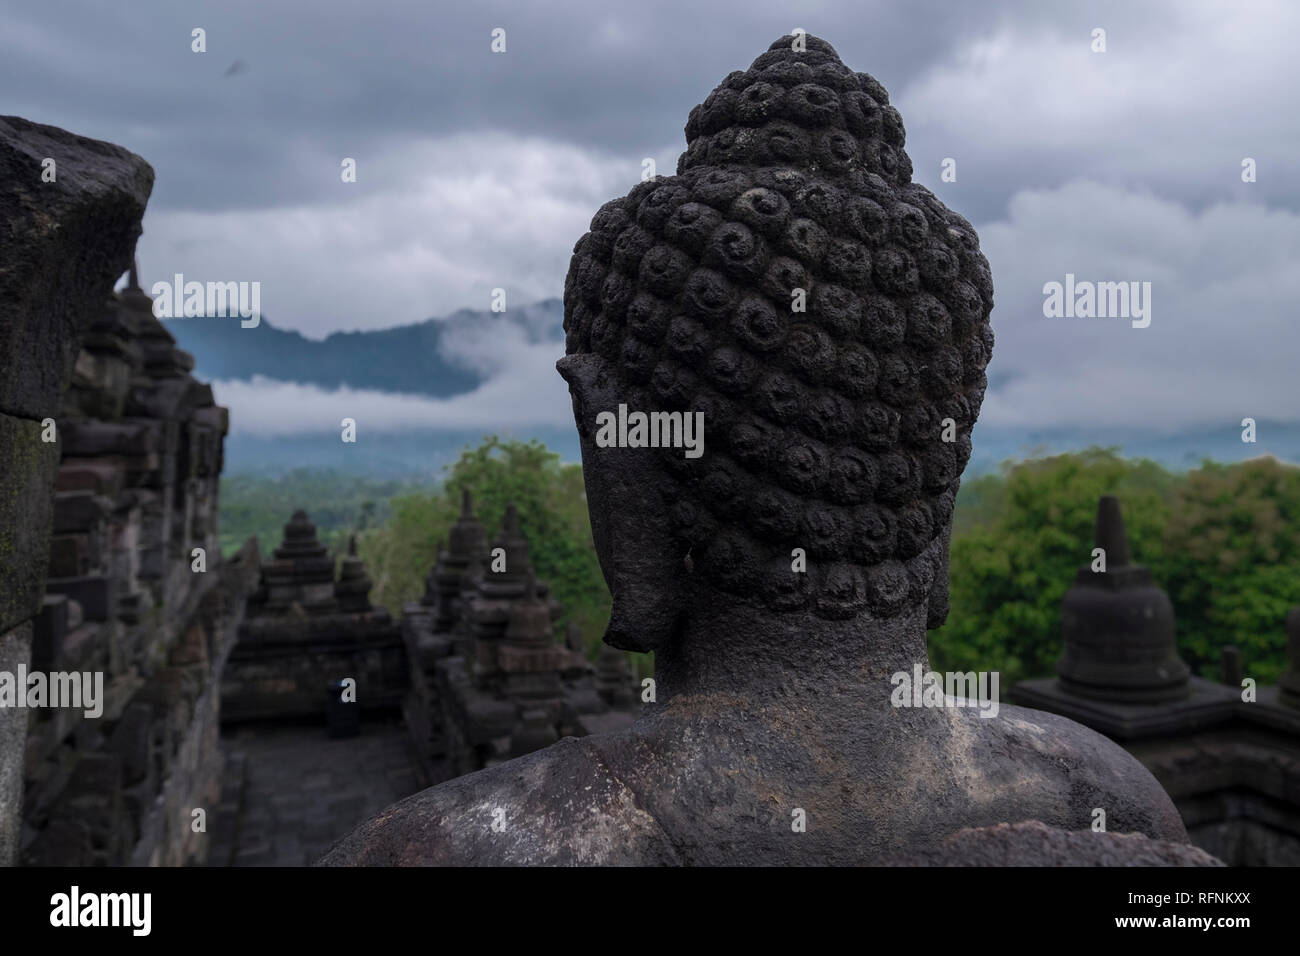 Looking from behind a Buddha head at Borobudur temple in Java, Indonesia. Stock Photo